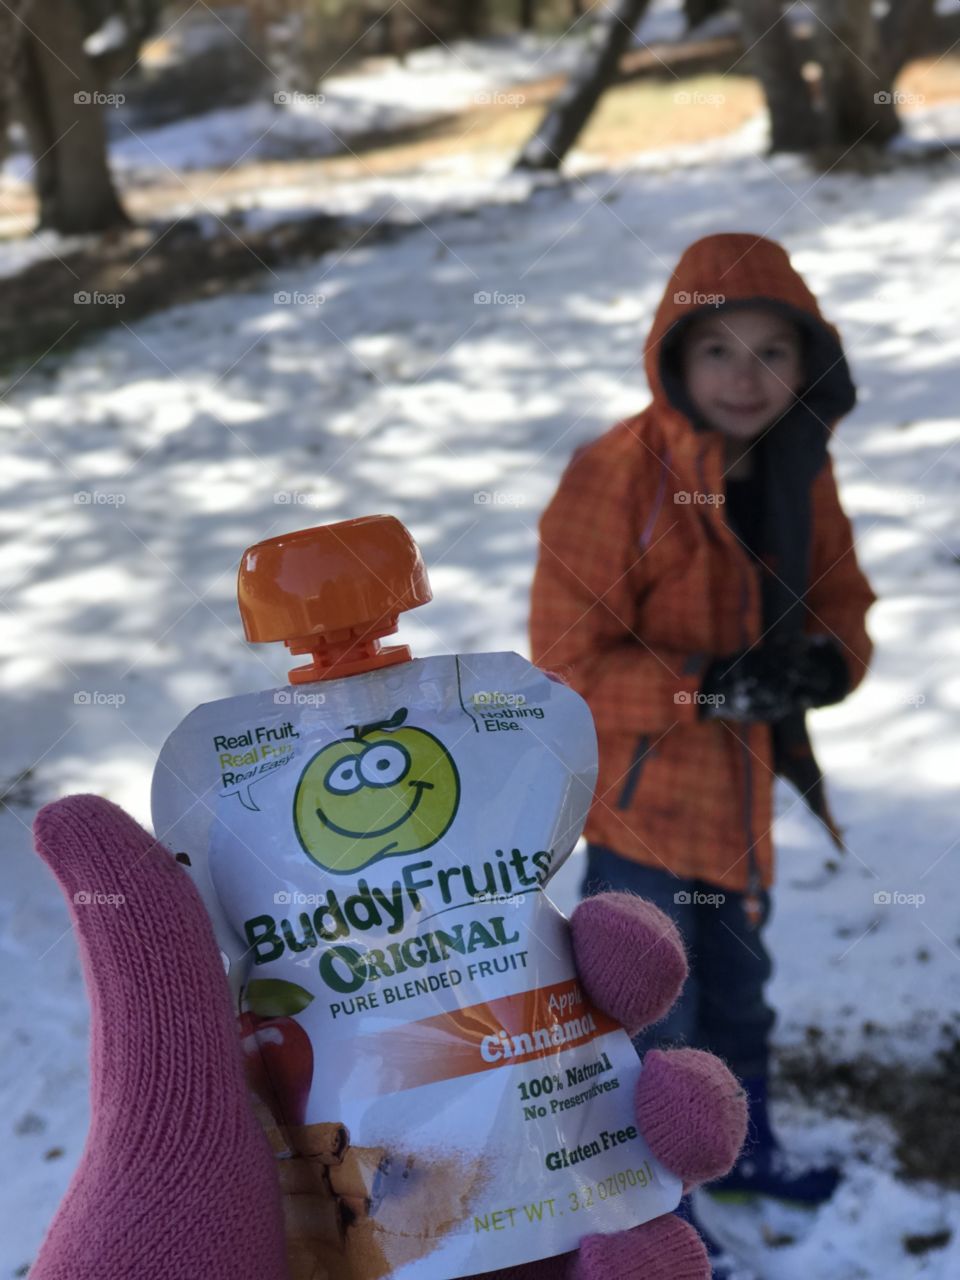 Buddy fruits in the cold